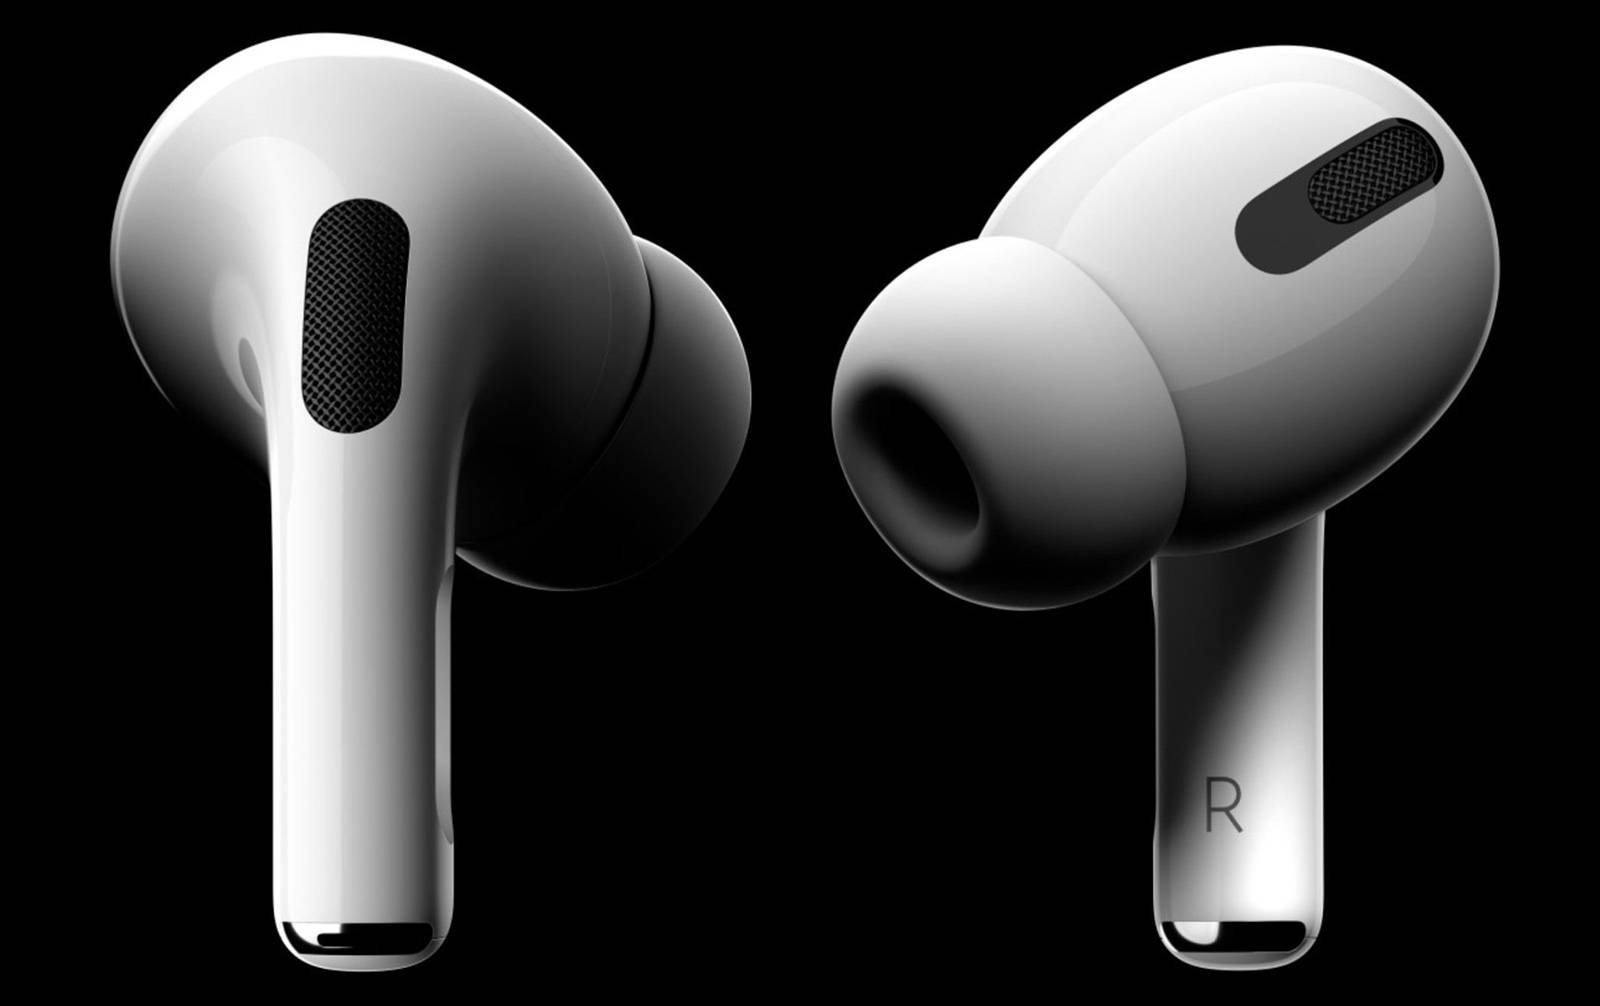 To find free AirPods with Apple’s 2021 Support to Faculty sale